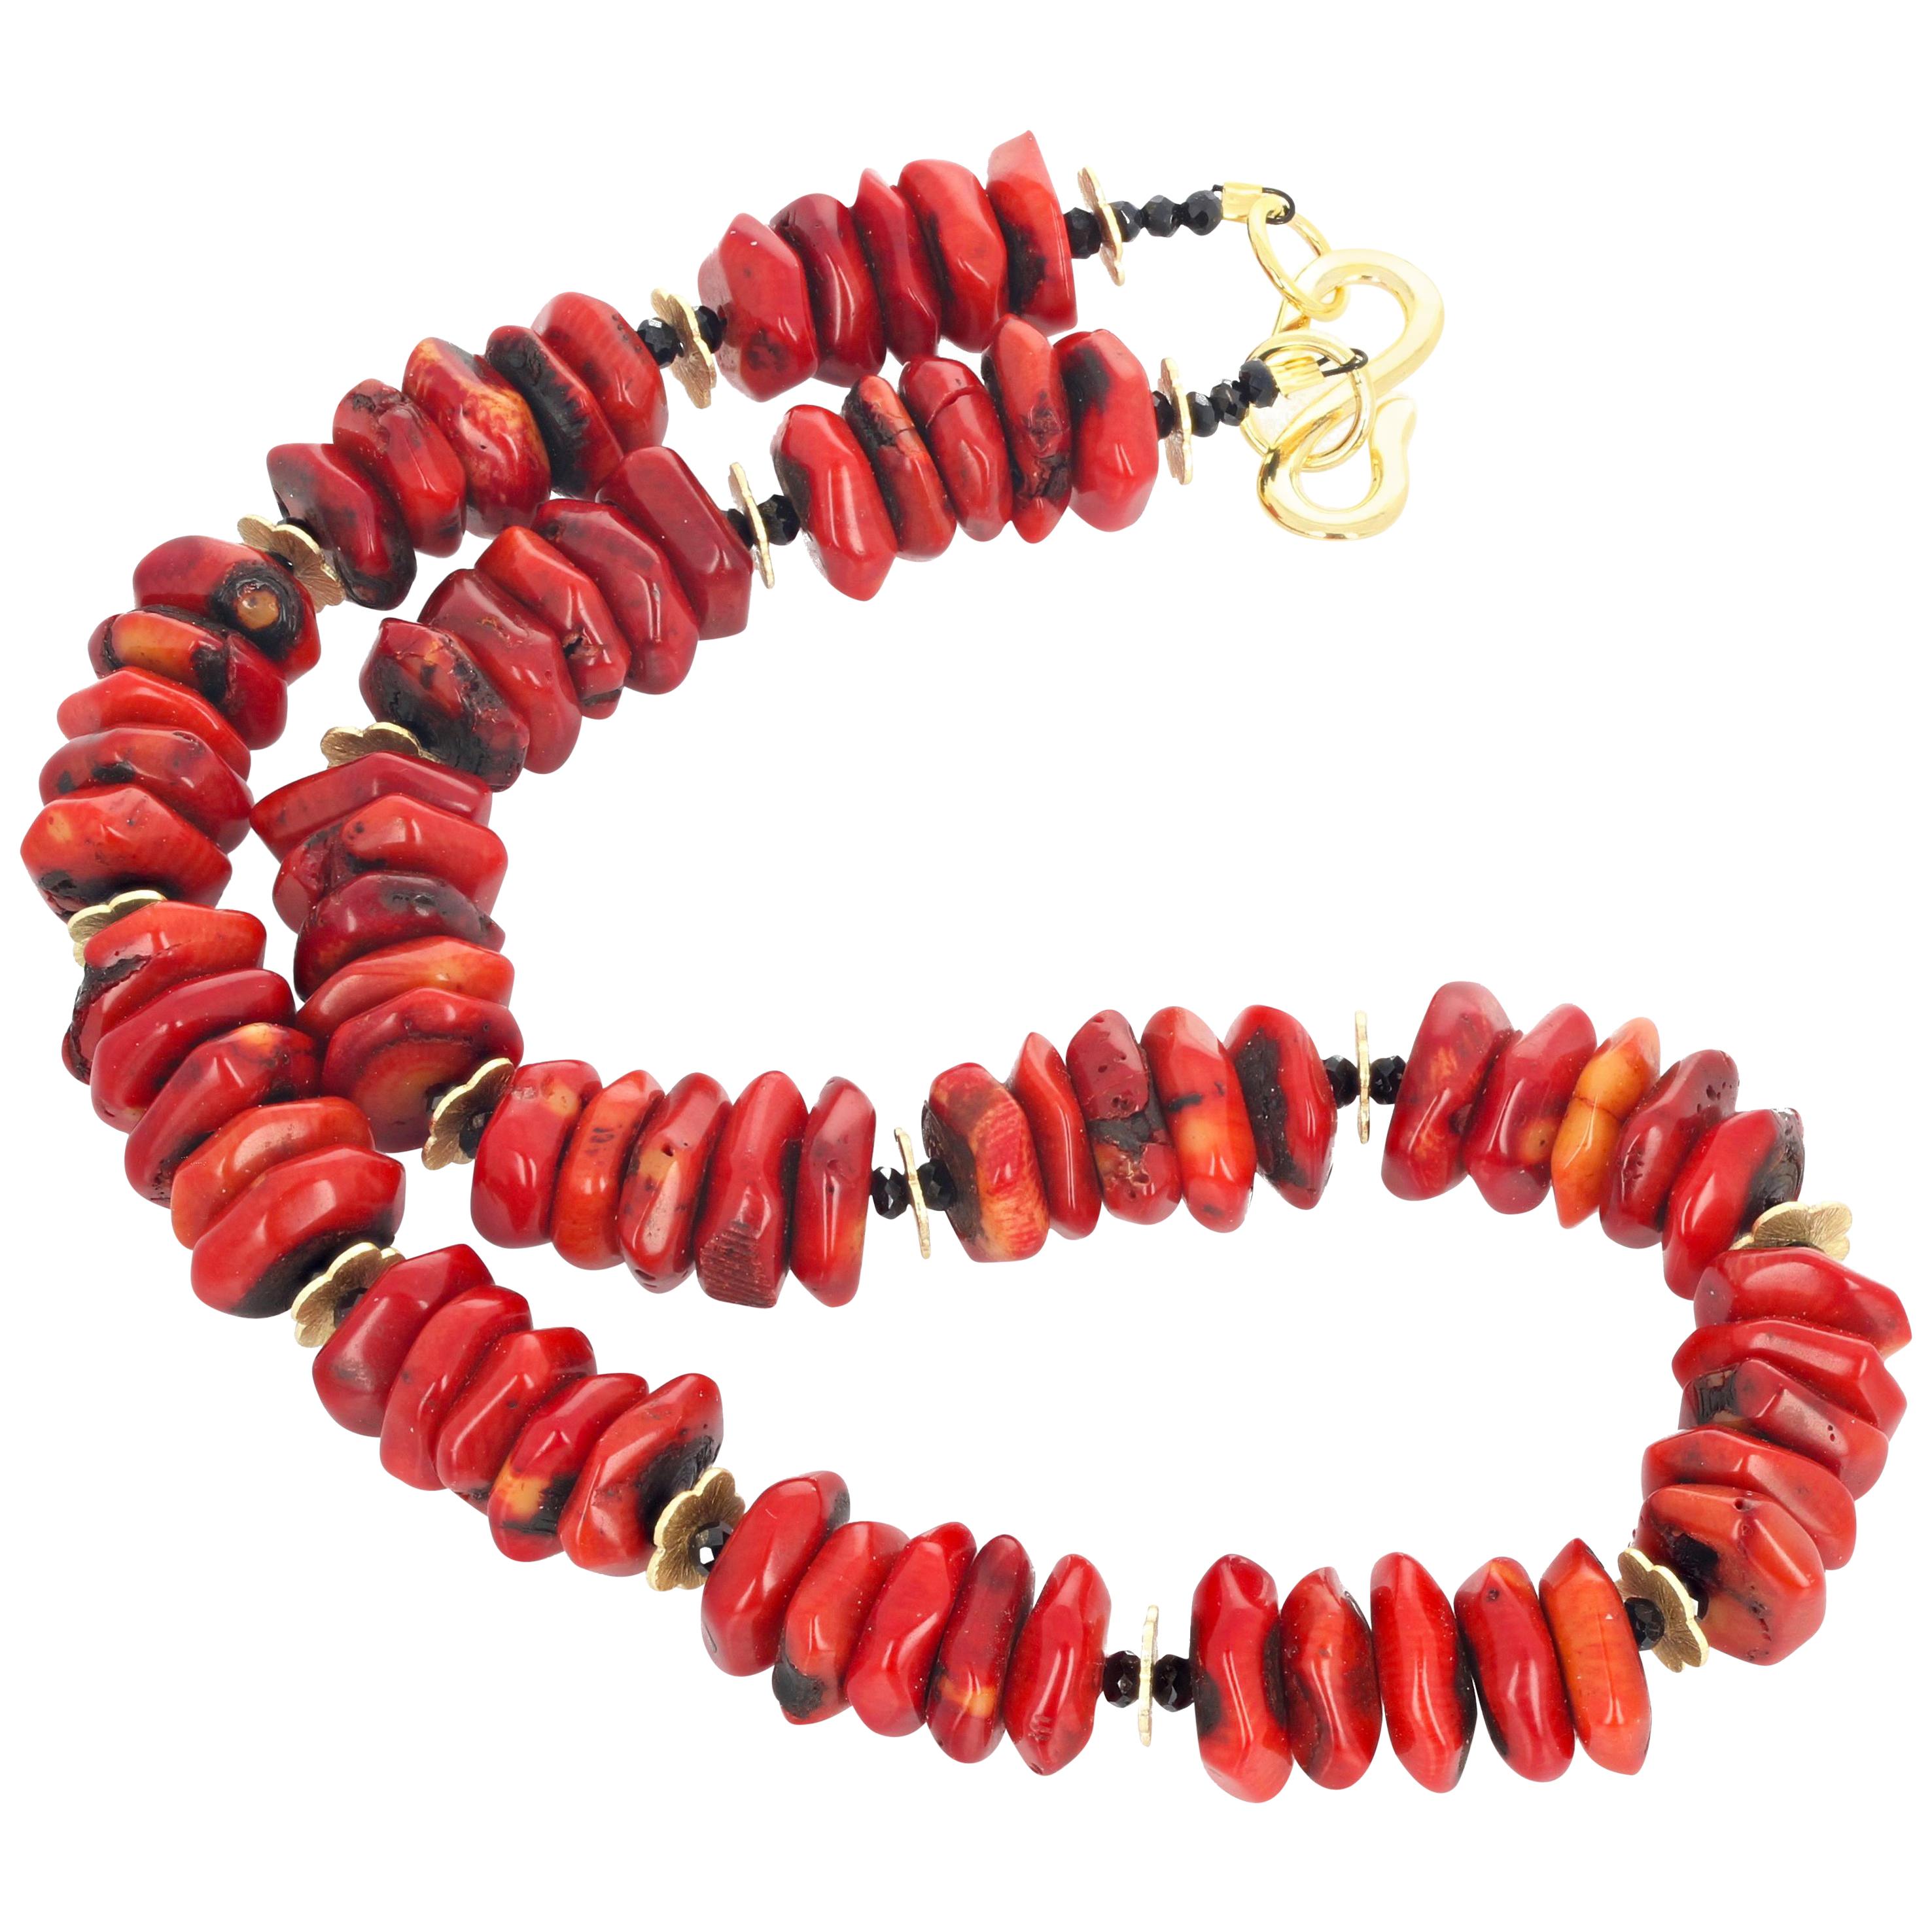 These beautiful polished rondels of Bamboo Coral average approximately 14 mm and are enhanced with golden rondels and sparkling black Spinel gems and are set in an 18 inch long necklace with goldy hook clasp.